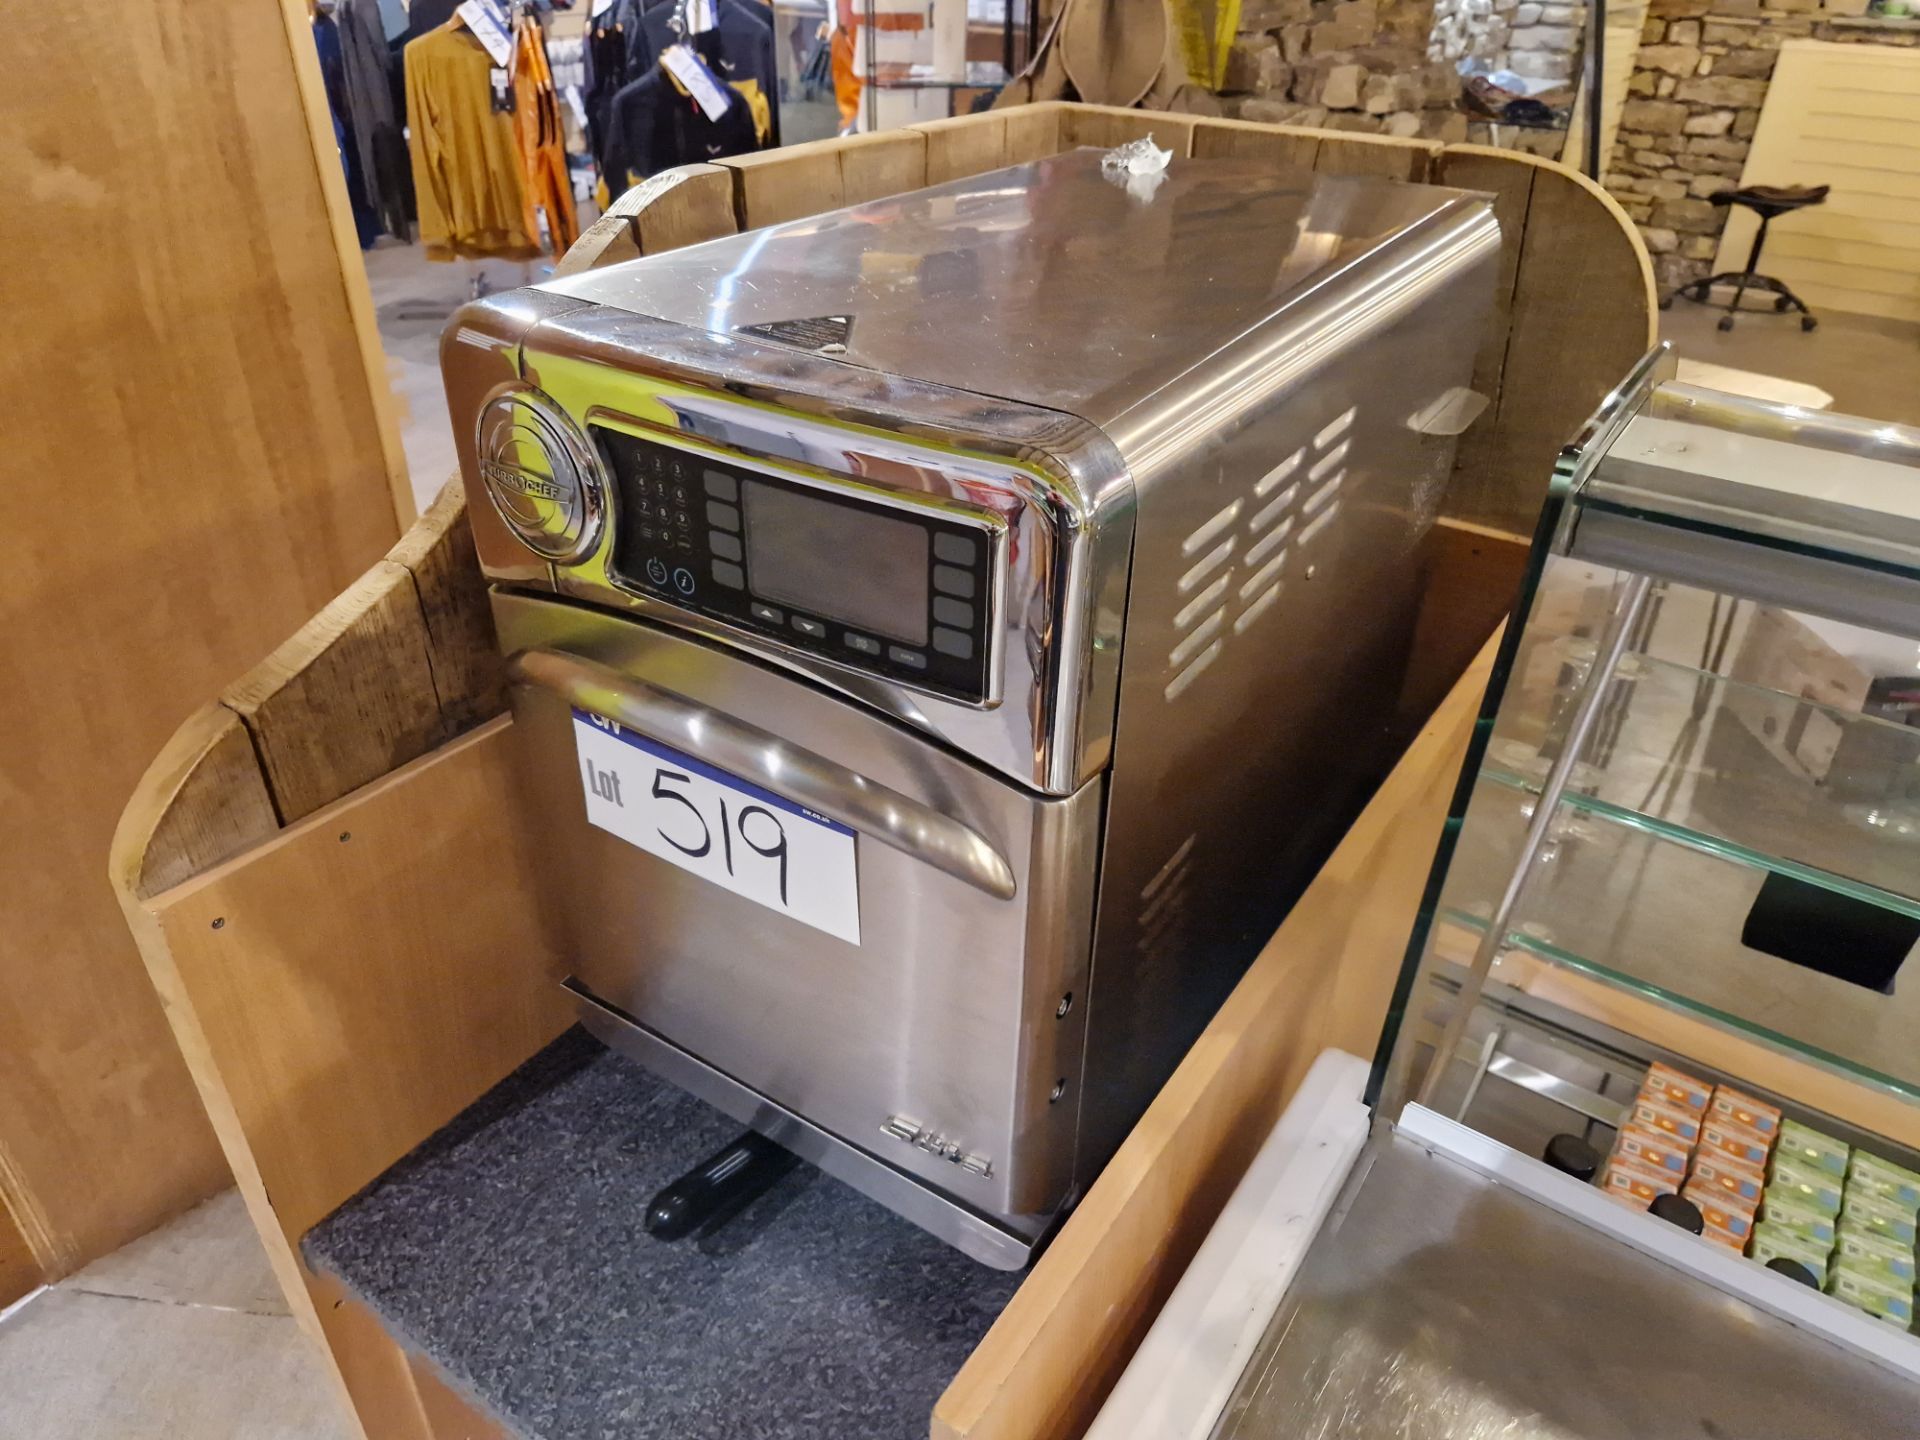 TurboChef Sota 1-EW High Speed Microwave Oven, Year of Manufacture 2018 (Lot subject to approval - Image 2 of 2